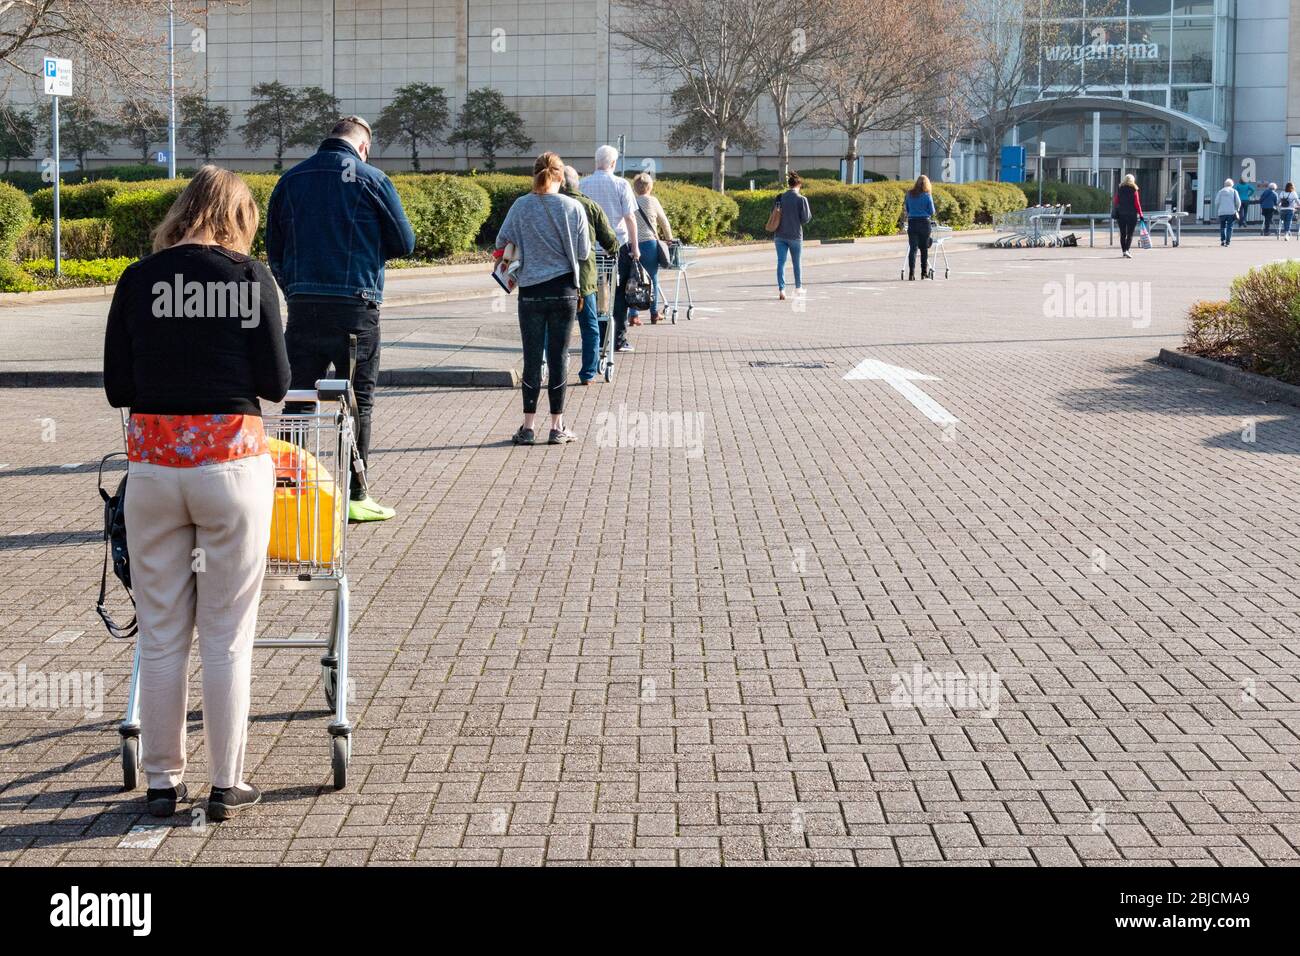 People wait in line in a queue for a supermarket during the coronavirus lockdown Stock Photo